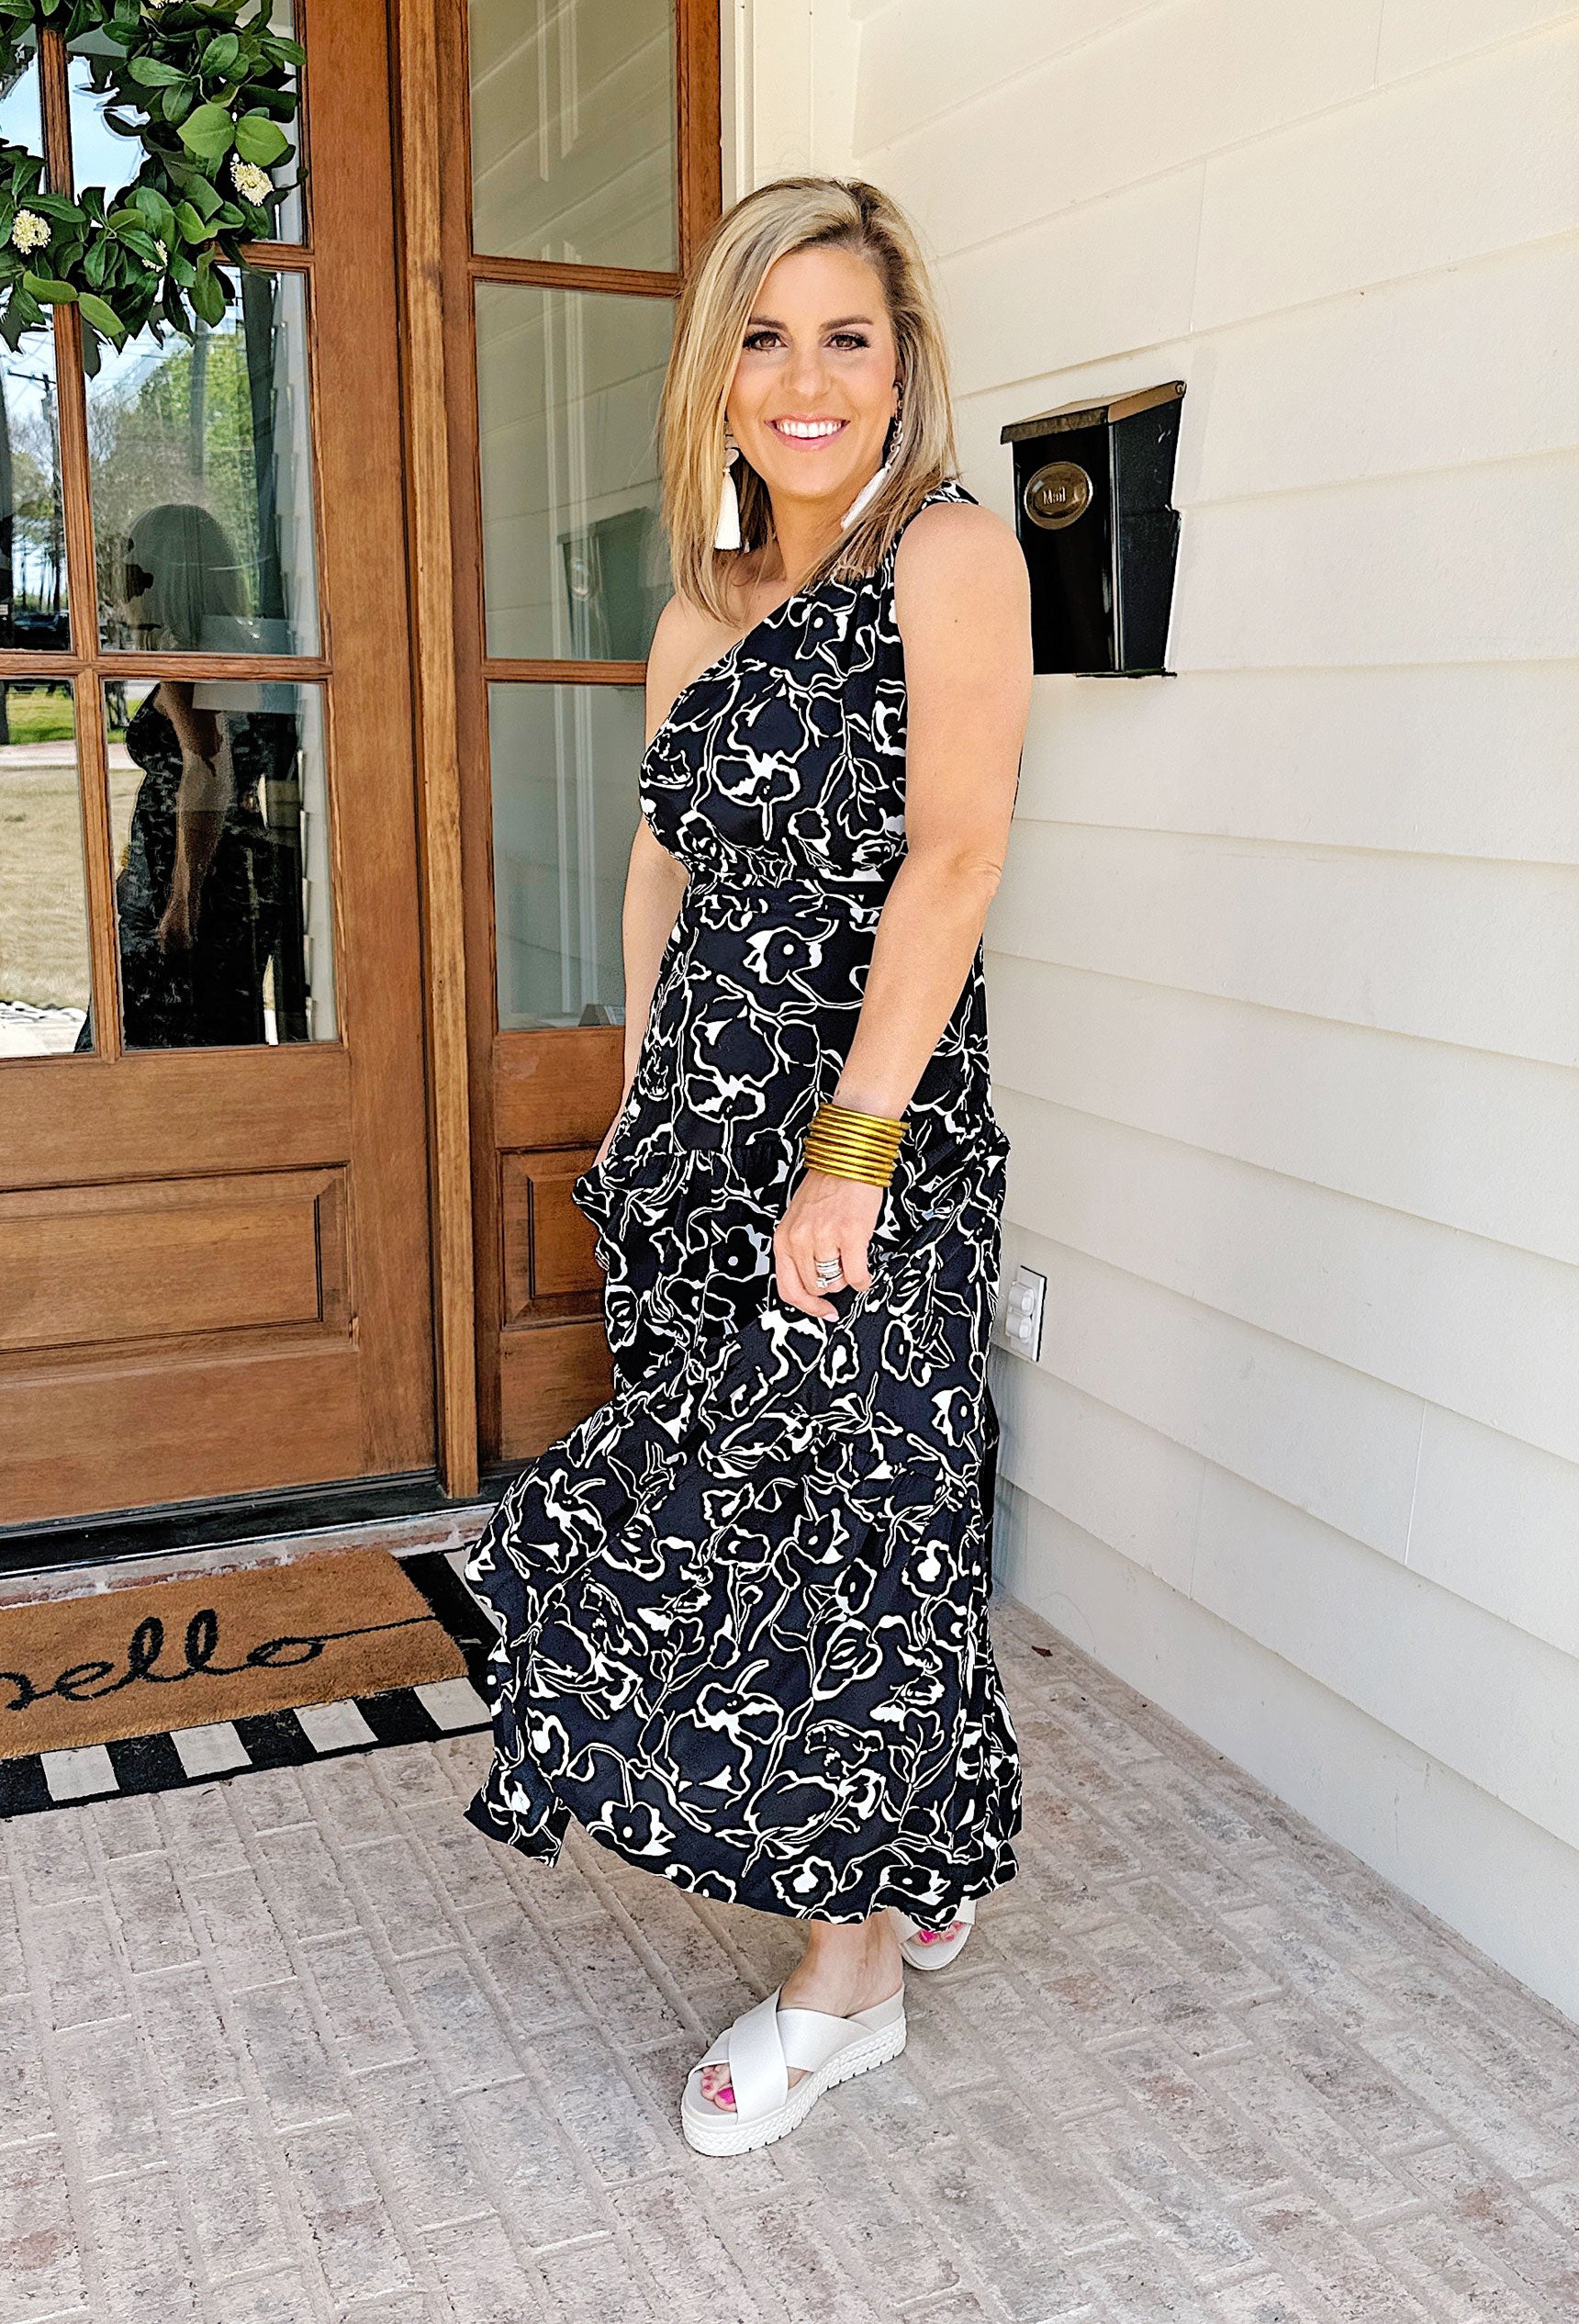 Found My Forever Floral Dress, maxi dress with black and white detailing, tiered one shoulder dress